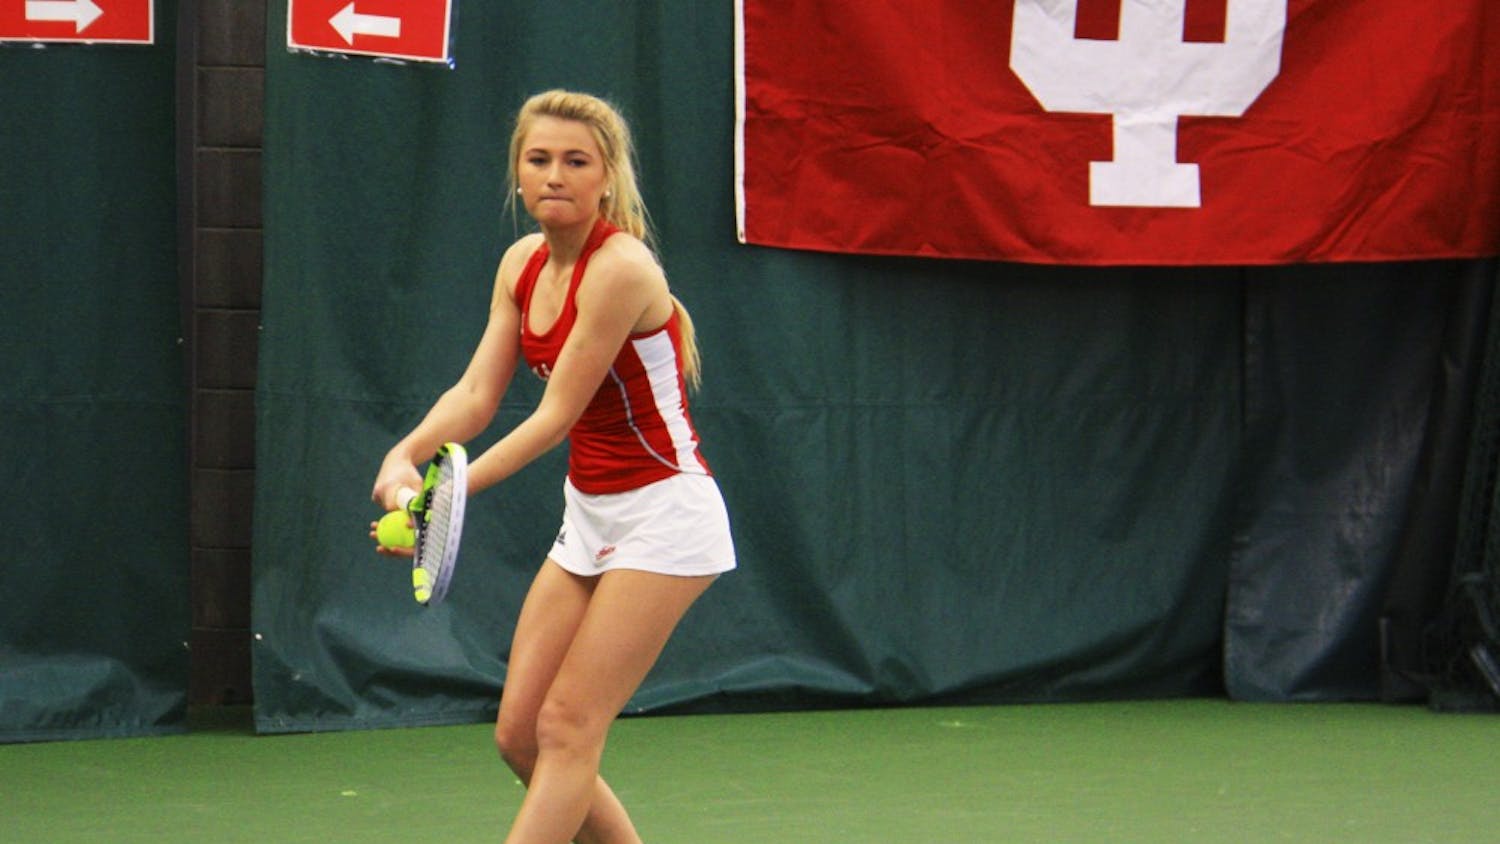 Then-sophomore, now senior Madison Appel serves the ball during a women's tennis doubles match against West Virginia in March 2017.&nbsp;